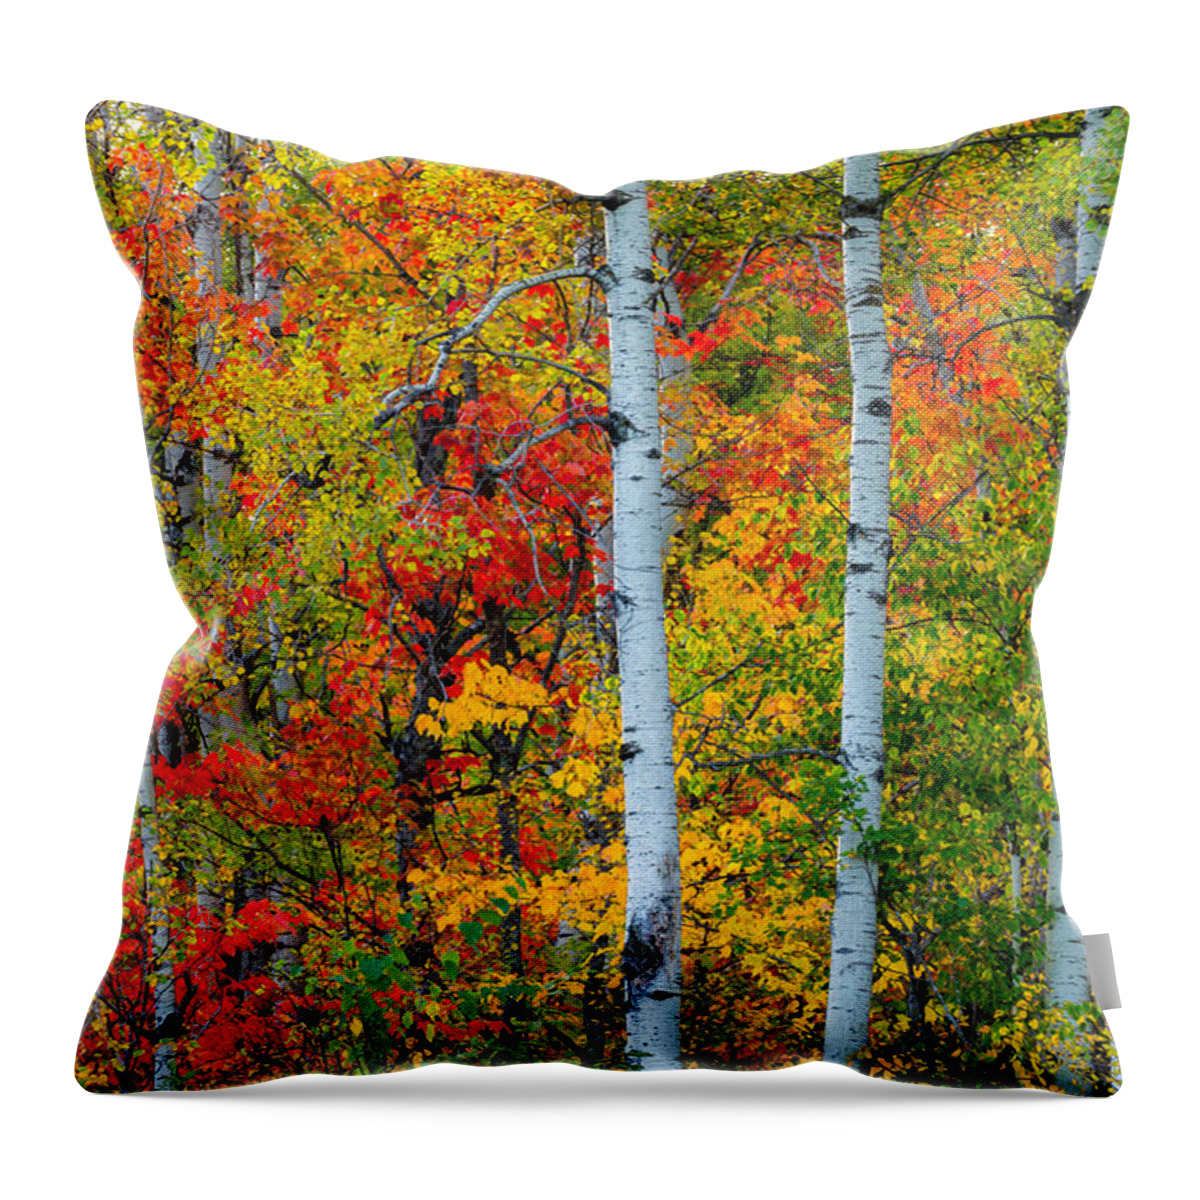 autumn Palette hawk Ridge lester Park lake Superior duluth minnesota fall Color Birch seven Bridges Rd Trees Nature greeting Cards mary Amerman Throw Pillow featuring the photograph Autumn Palette by Mary Amerman